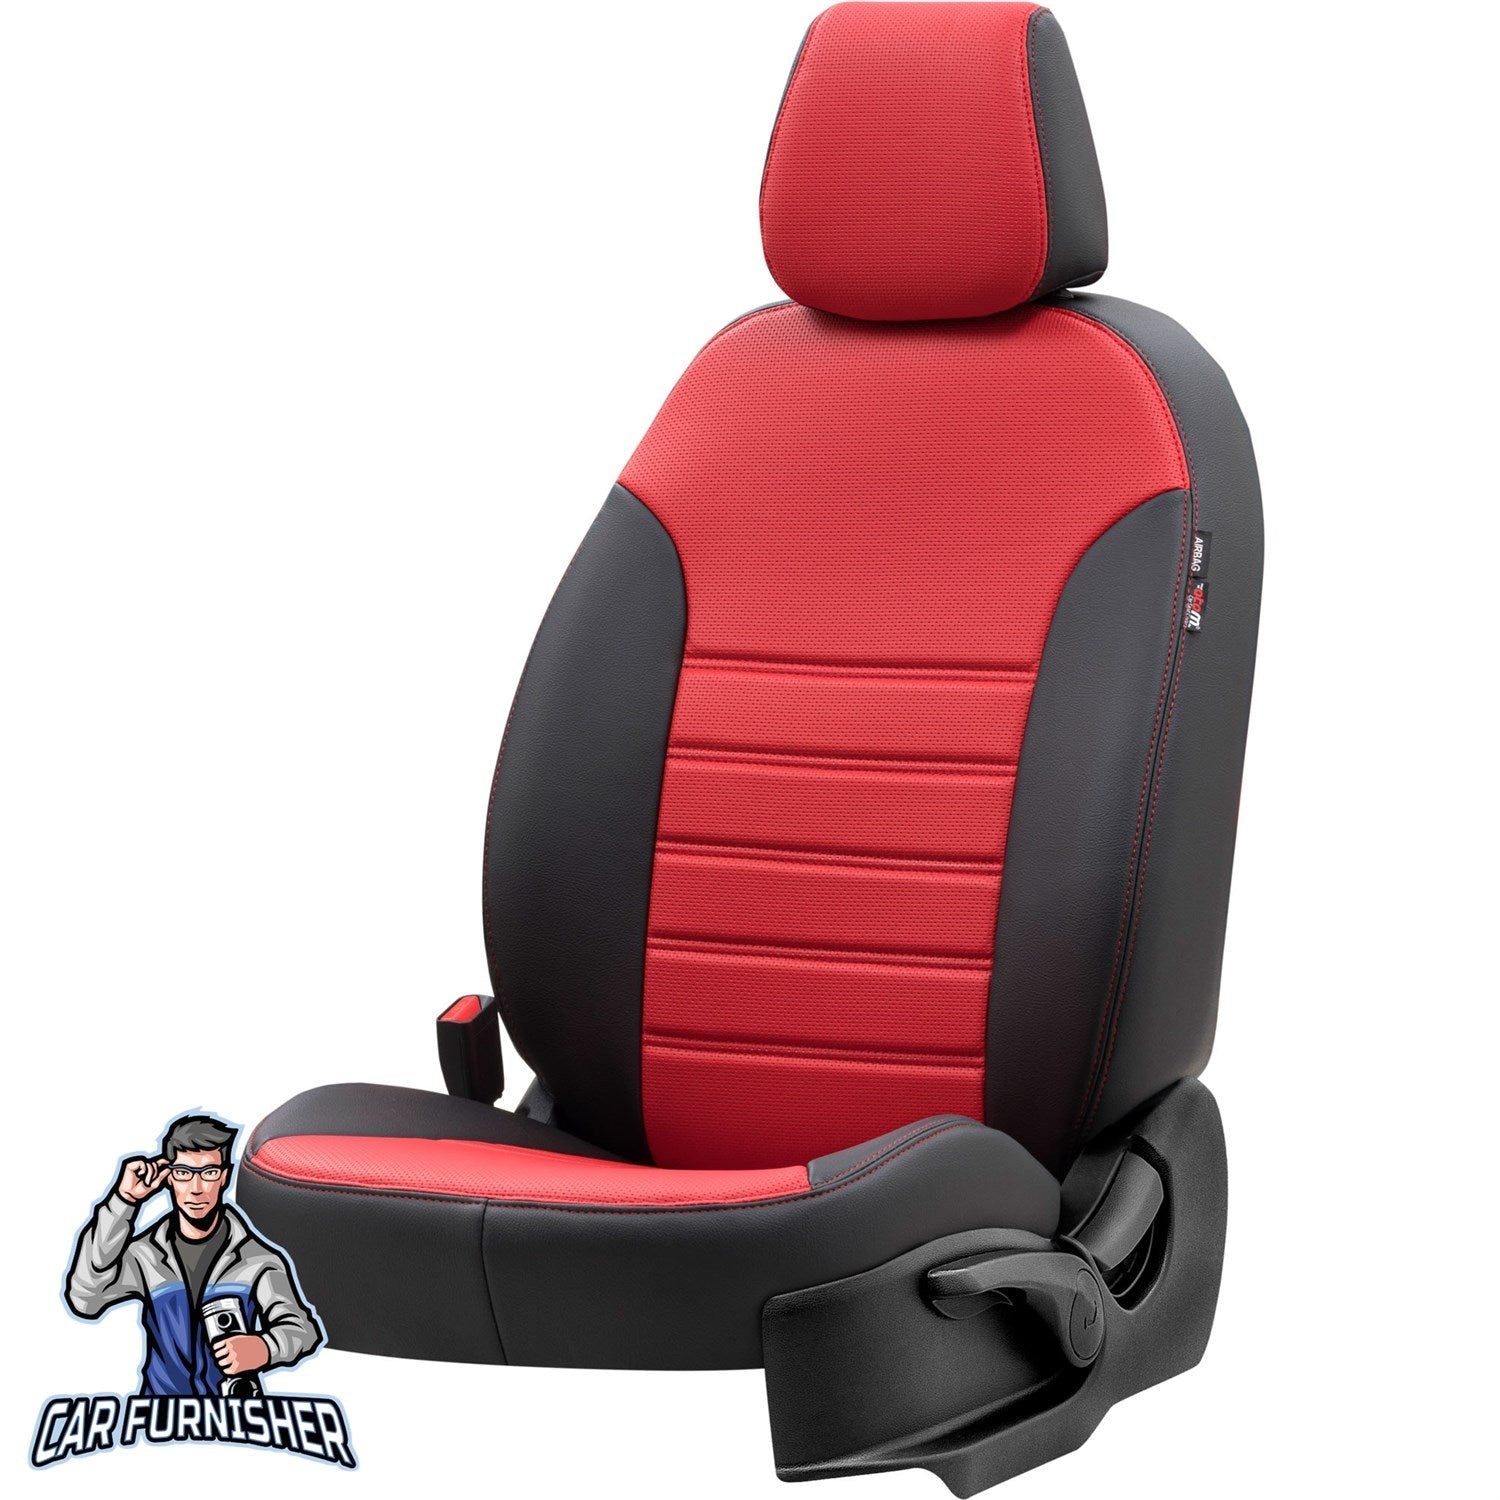 Honda HRV Seat Covers New York Leather Design Red Leather